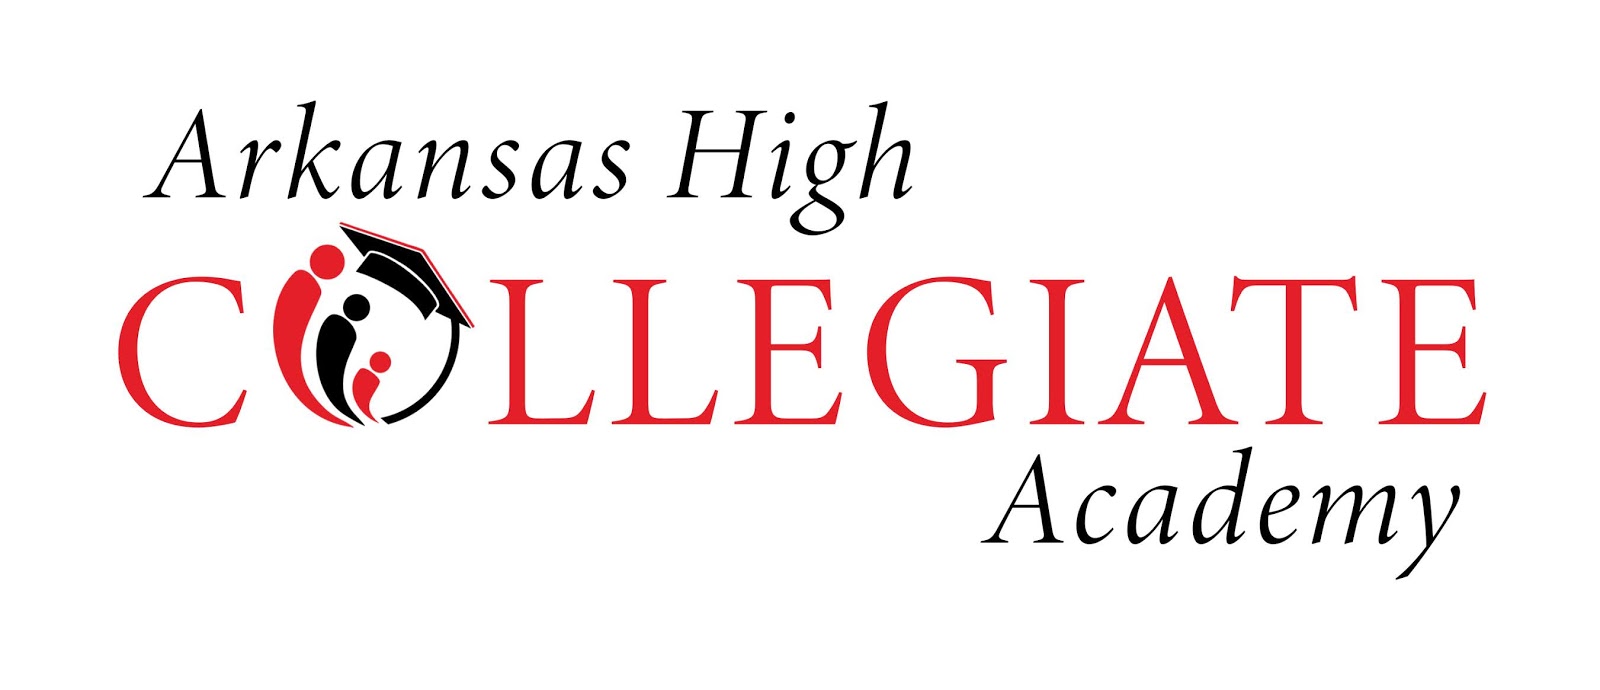 there-s-more-time-to-apply-for-arkansas-high-collegiate-academy